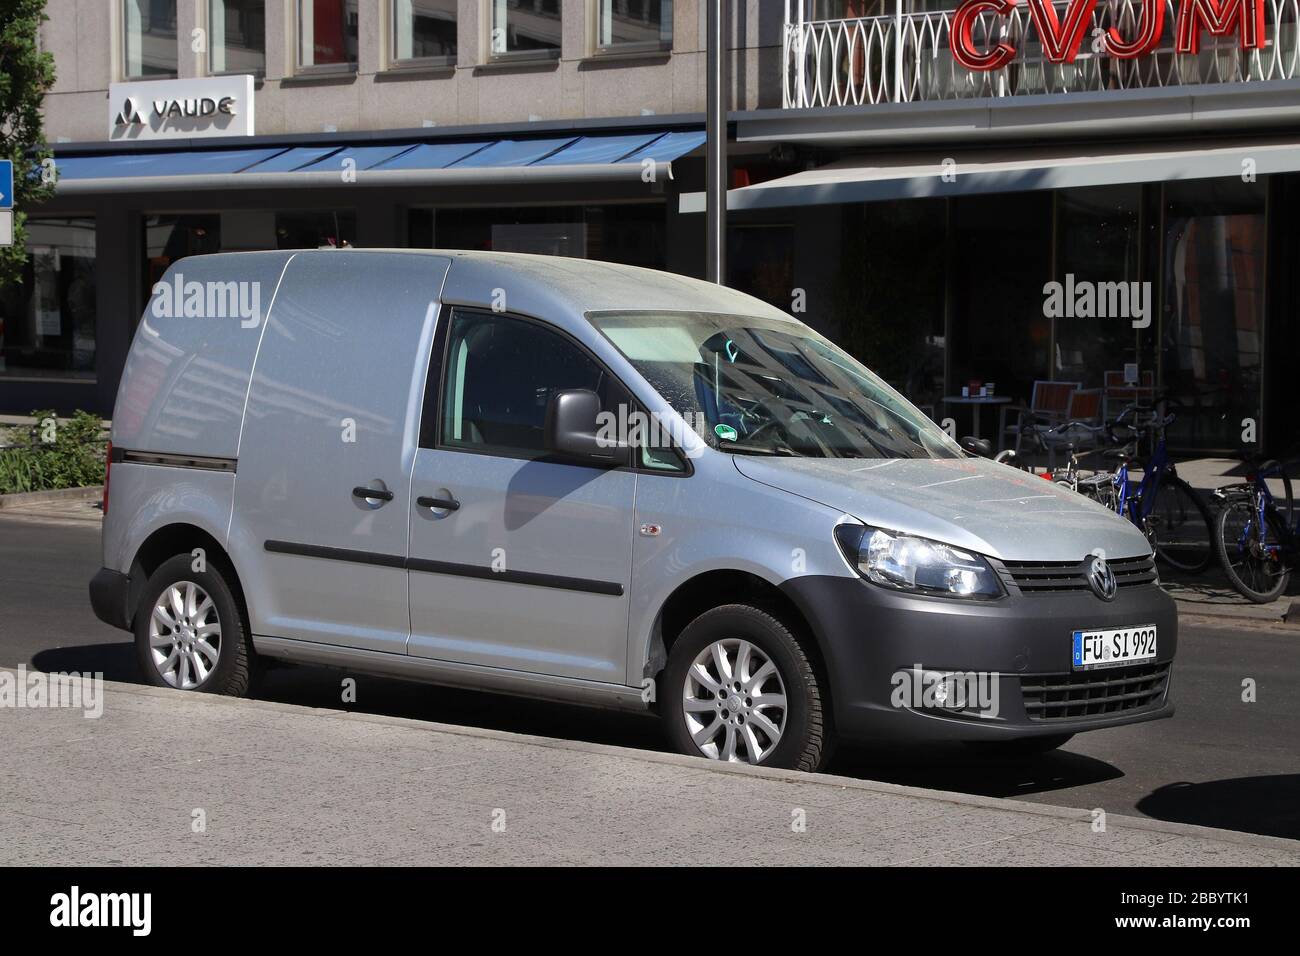 NUREMBERG, GERMANY - MAY 7, 2018: Volkswagen Caddy compact van car parked in Germany. There were 45.8 million cars registered in Germany (as of 2017). Stock Photo